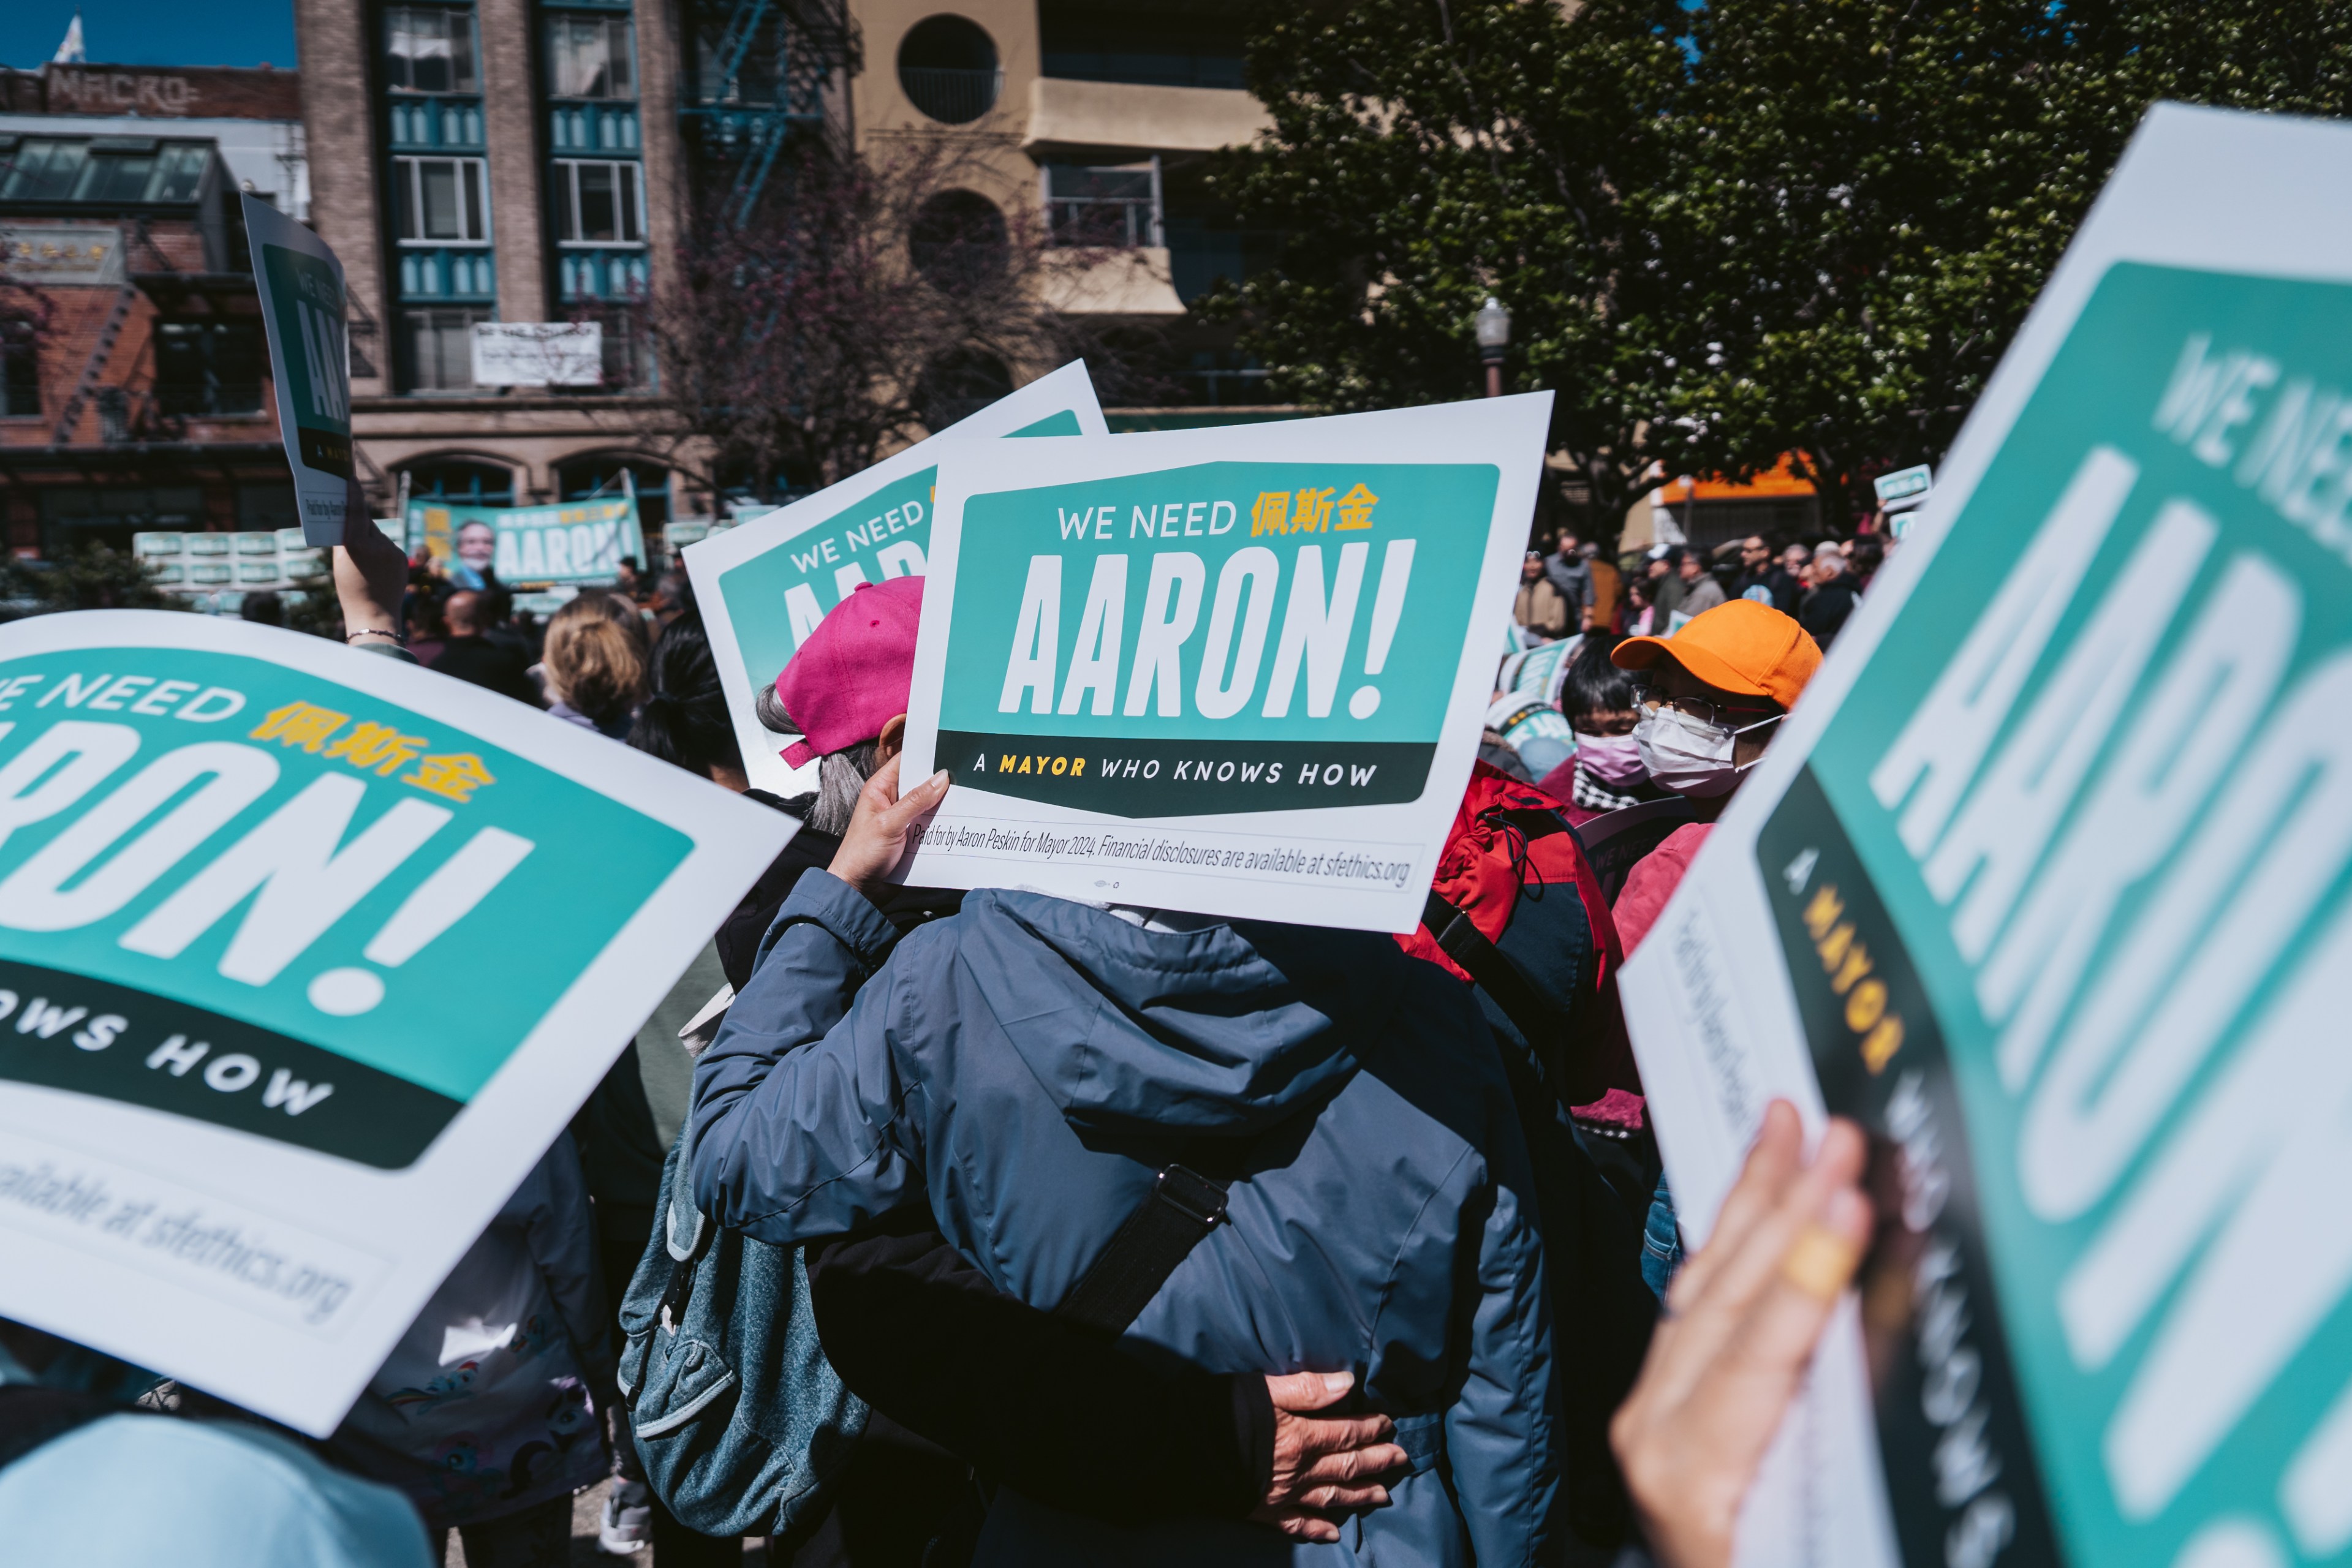 People at a rally hold signs supporting &quot;Aaron&quot; for mayor, with buildings in the background.